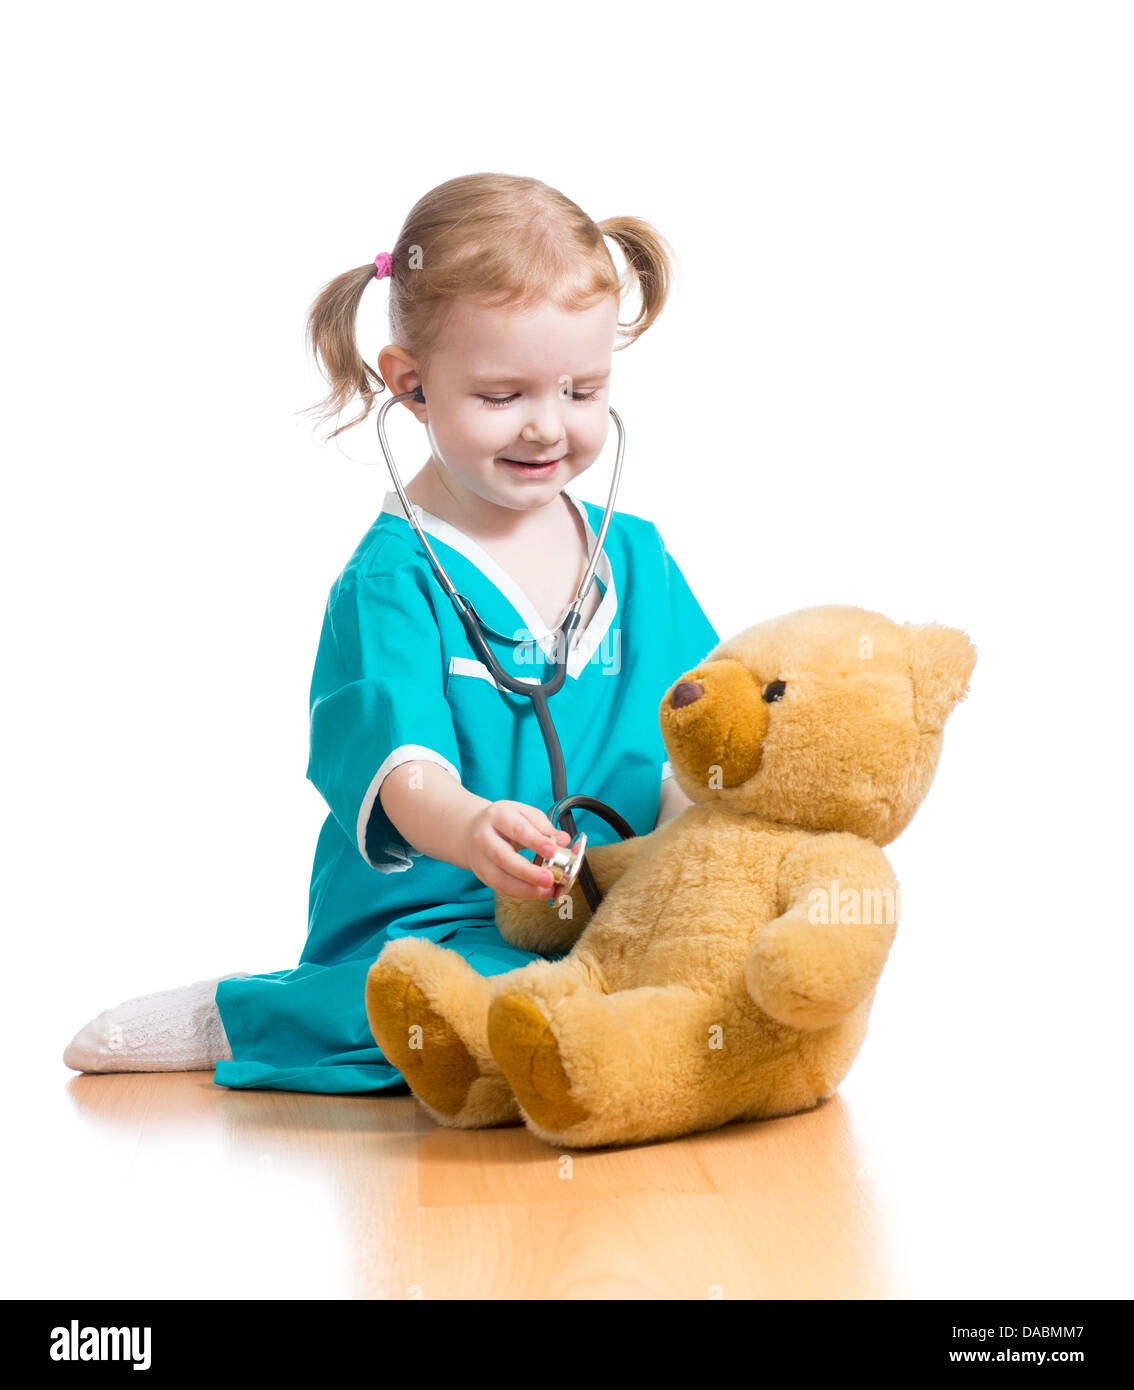 child girl with clothes of doctor playing with plush toy Stock Photo